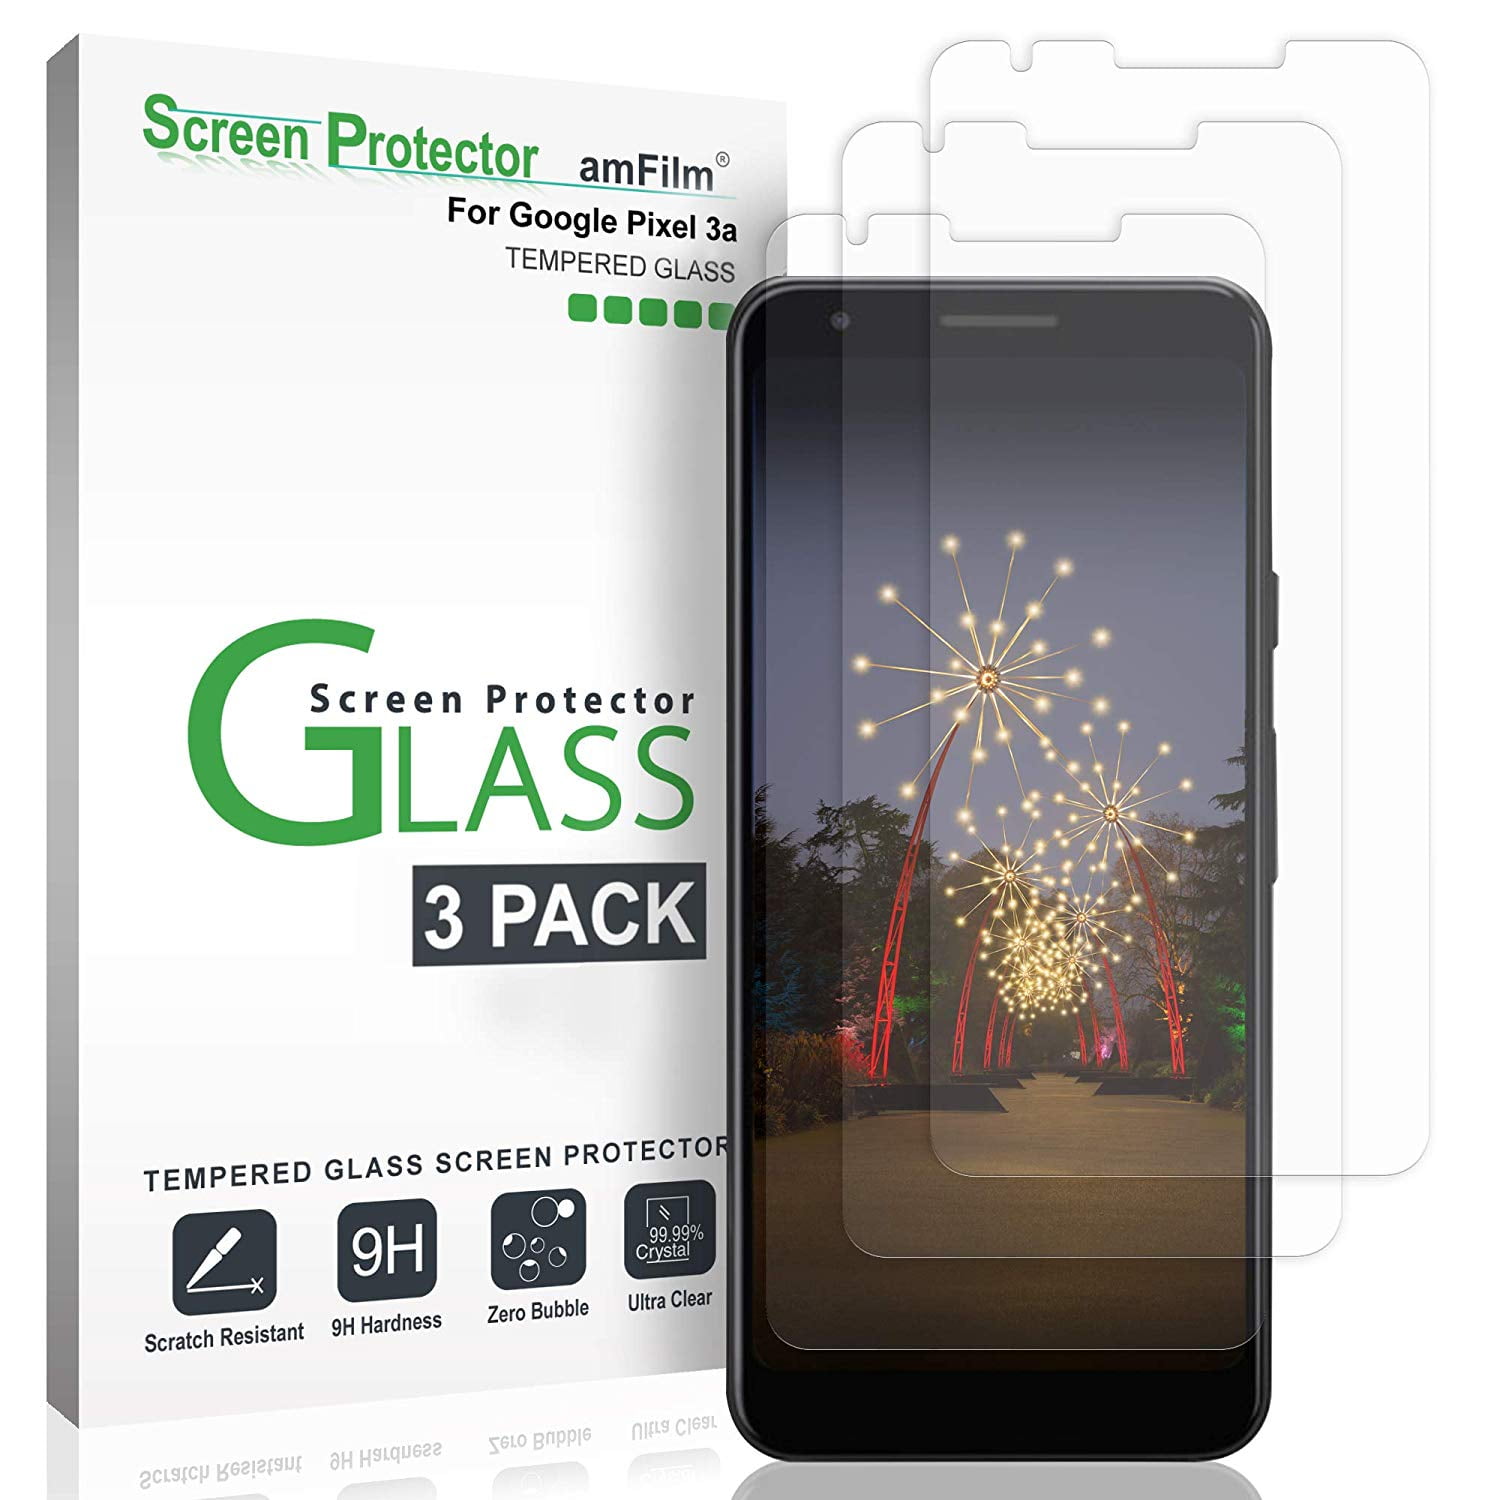 Screen Protector Antishock for Google Pixel 3a